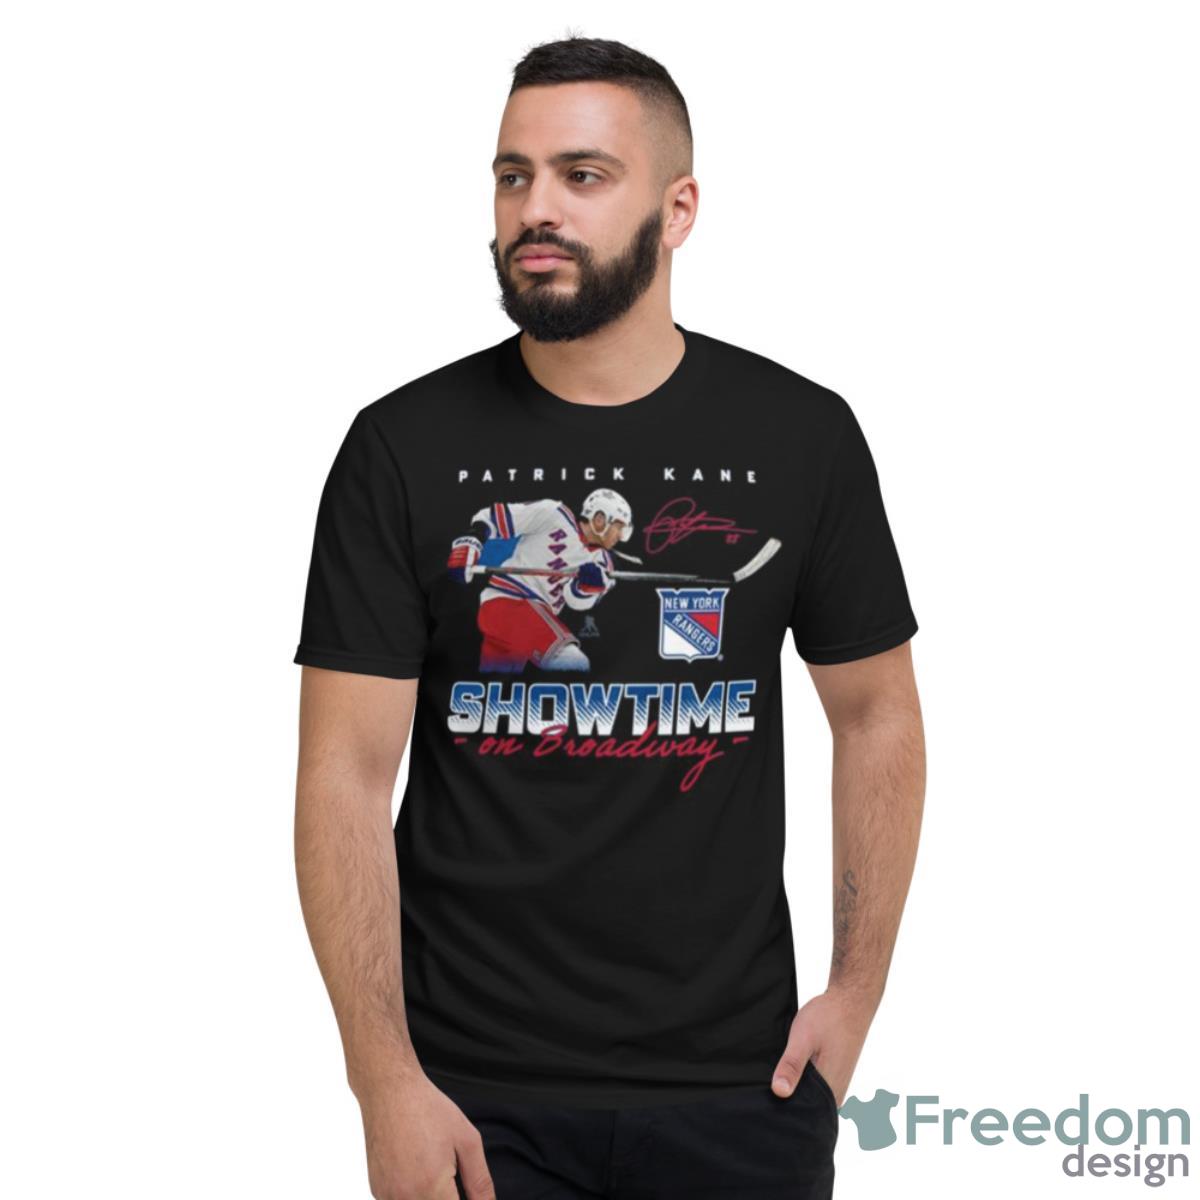 Pete Alonso Shirt  New York Mets Pete Alonso T-Shirts - Mets Store